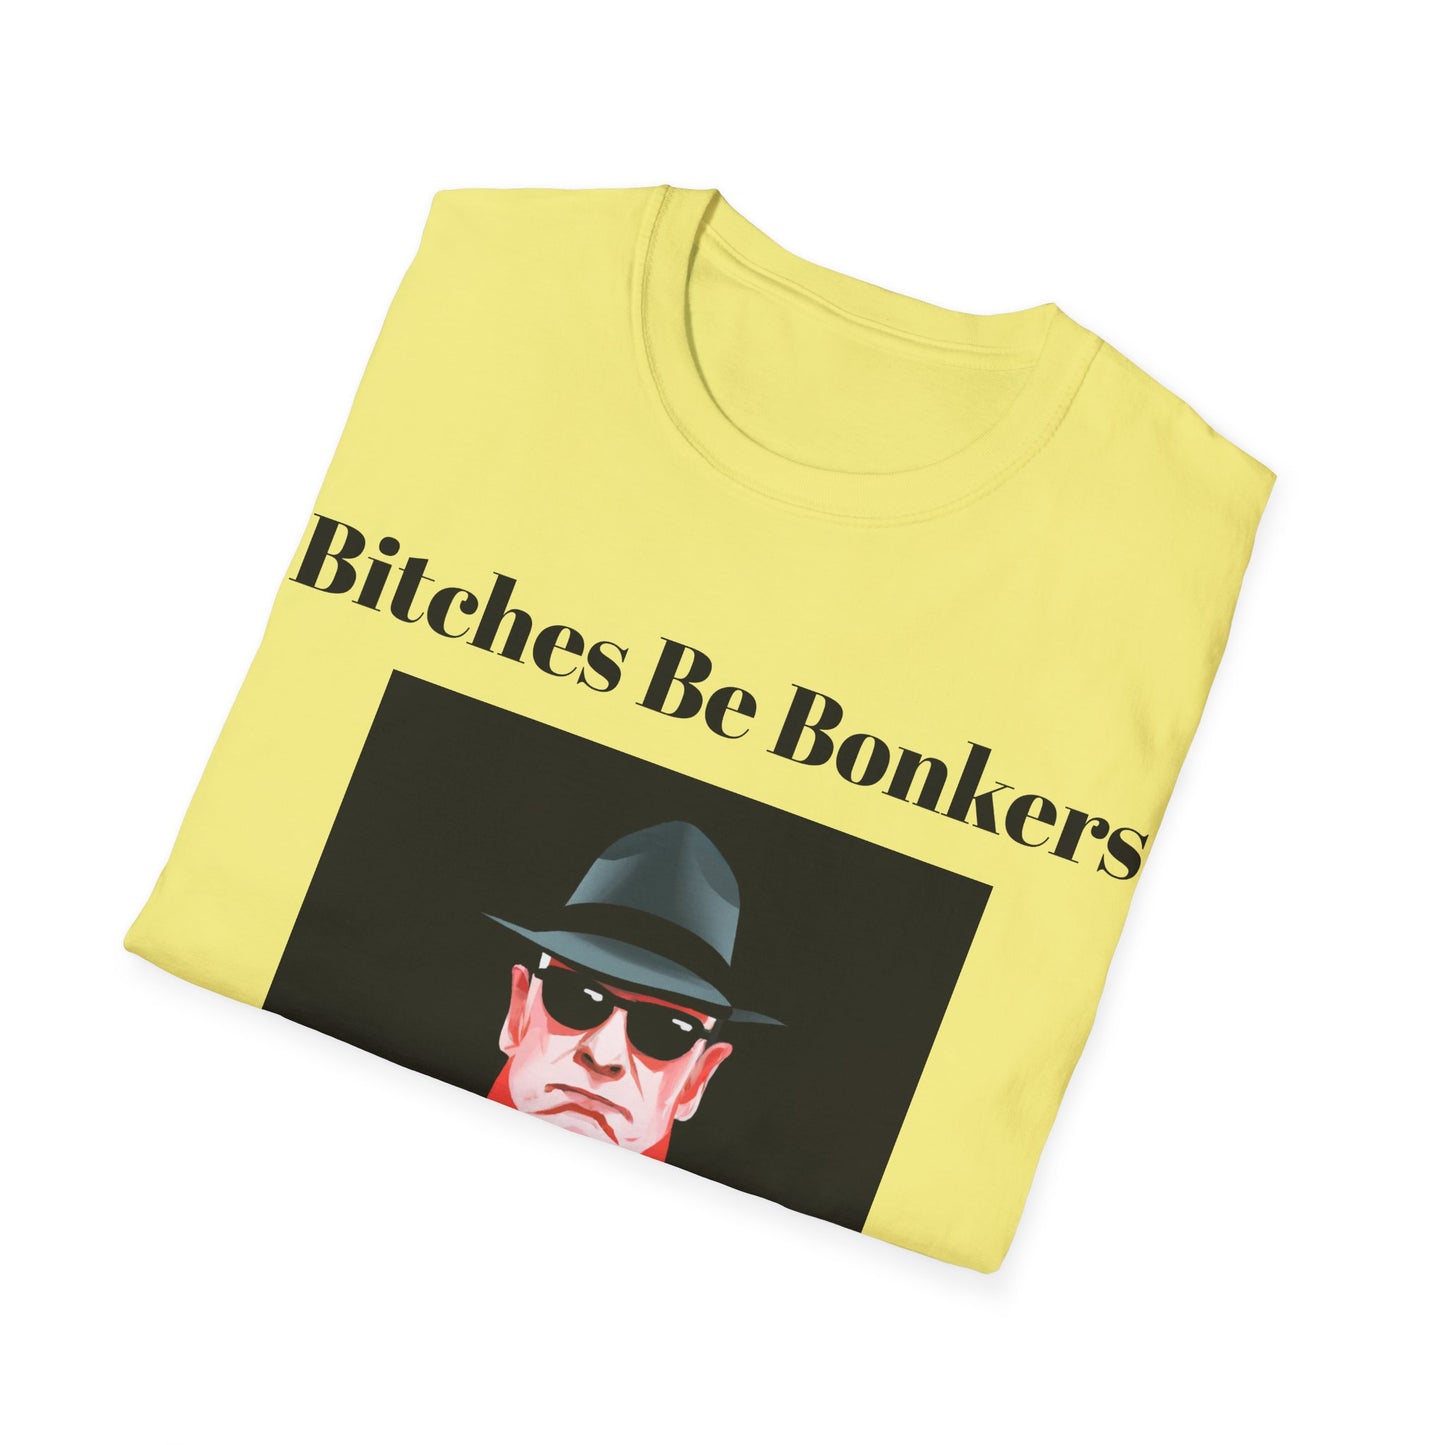 Bitches Be Bonkers